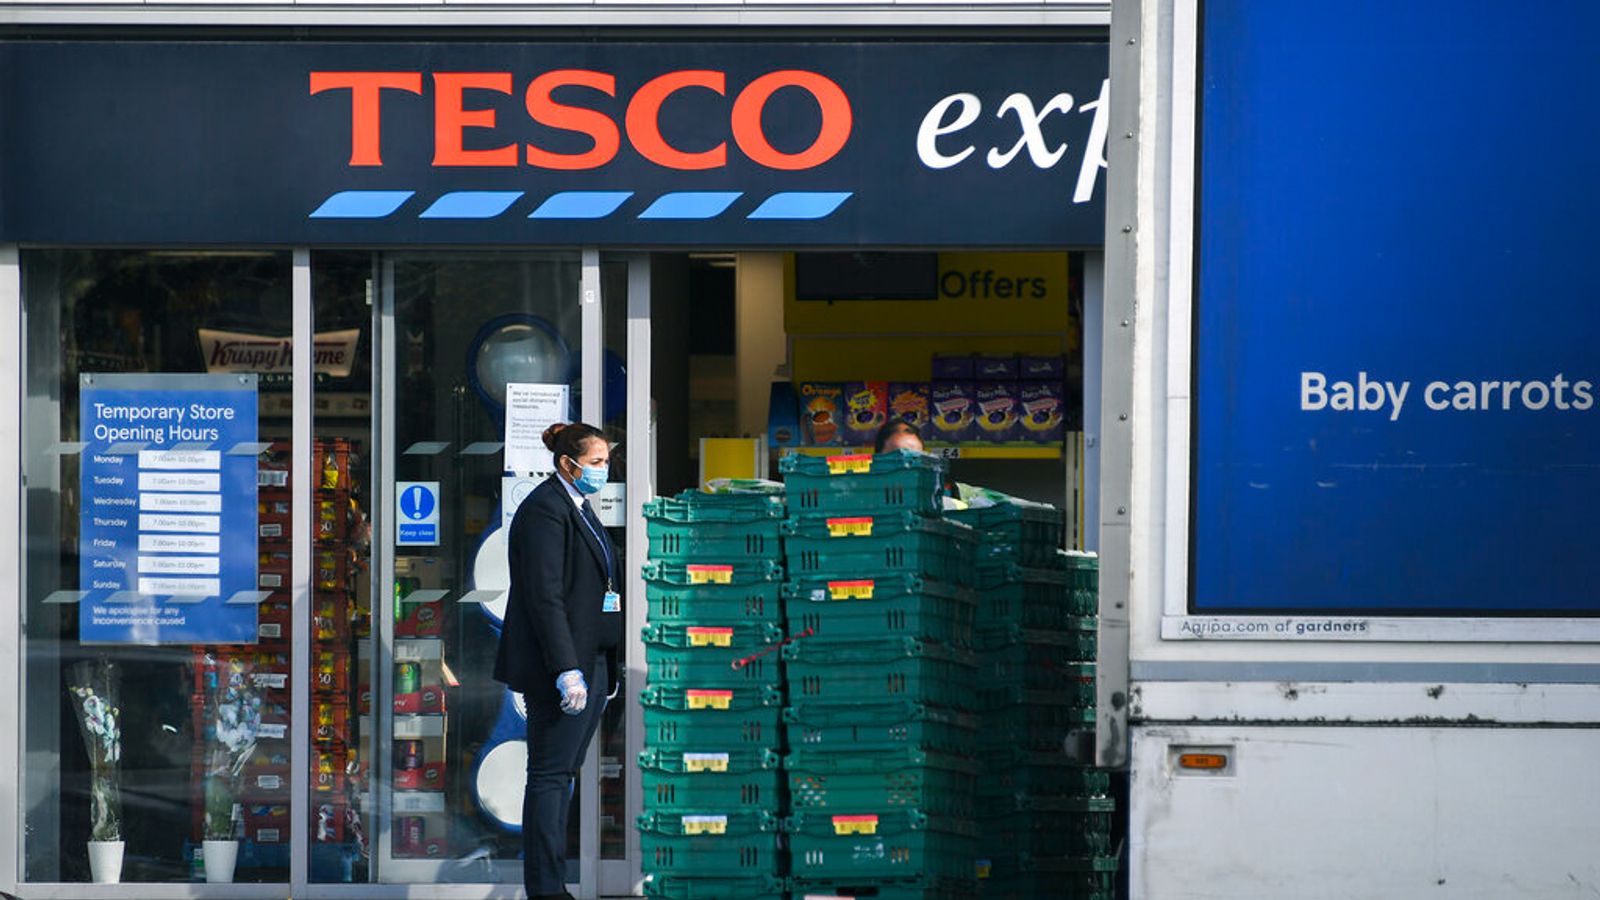 Strike threat forces Tesco to improve pay offer - Socialist Party